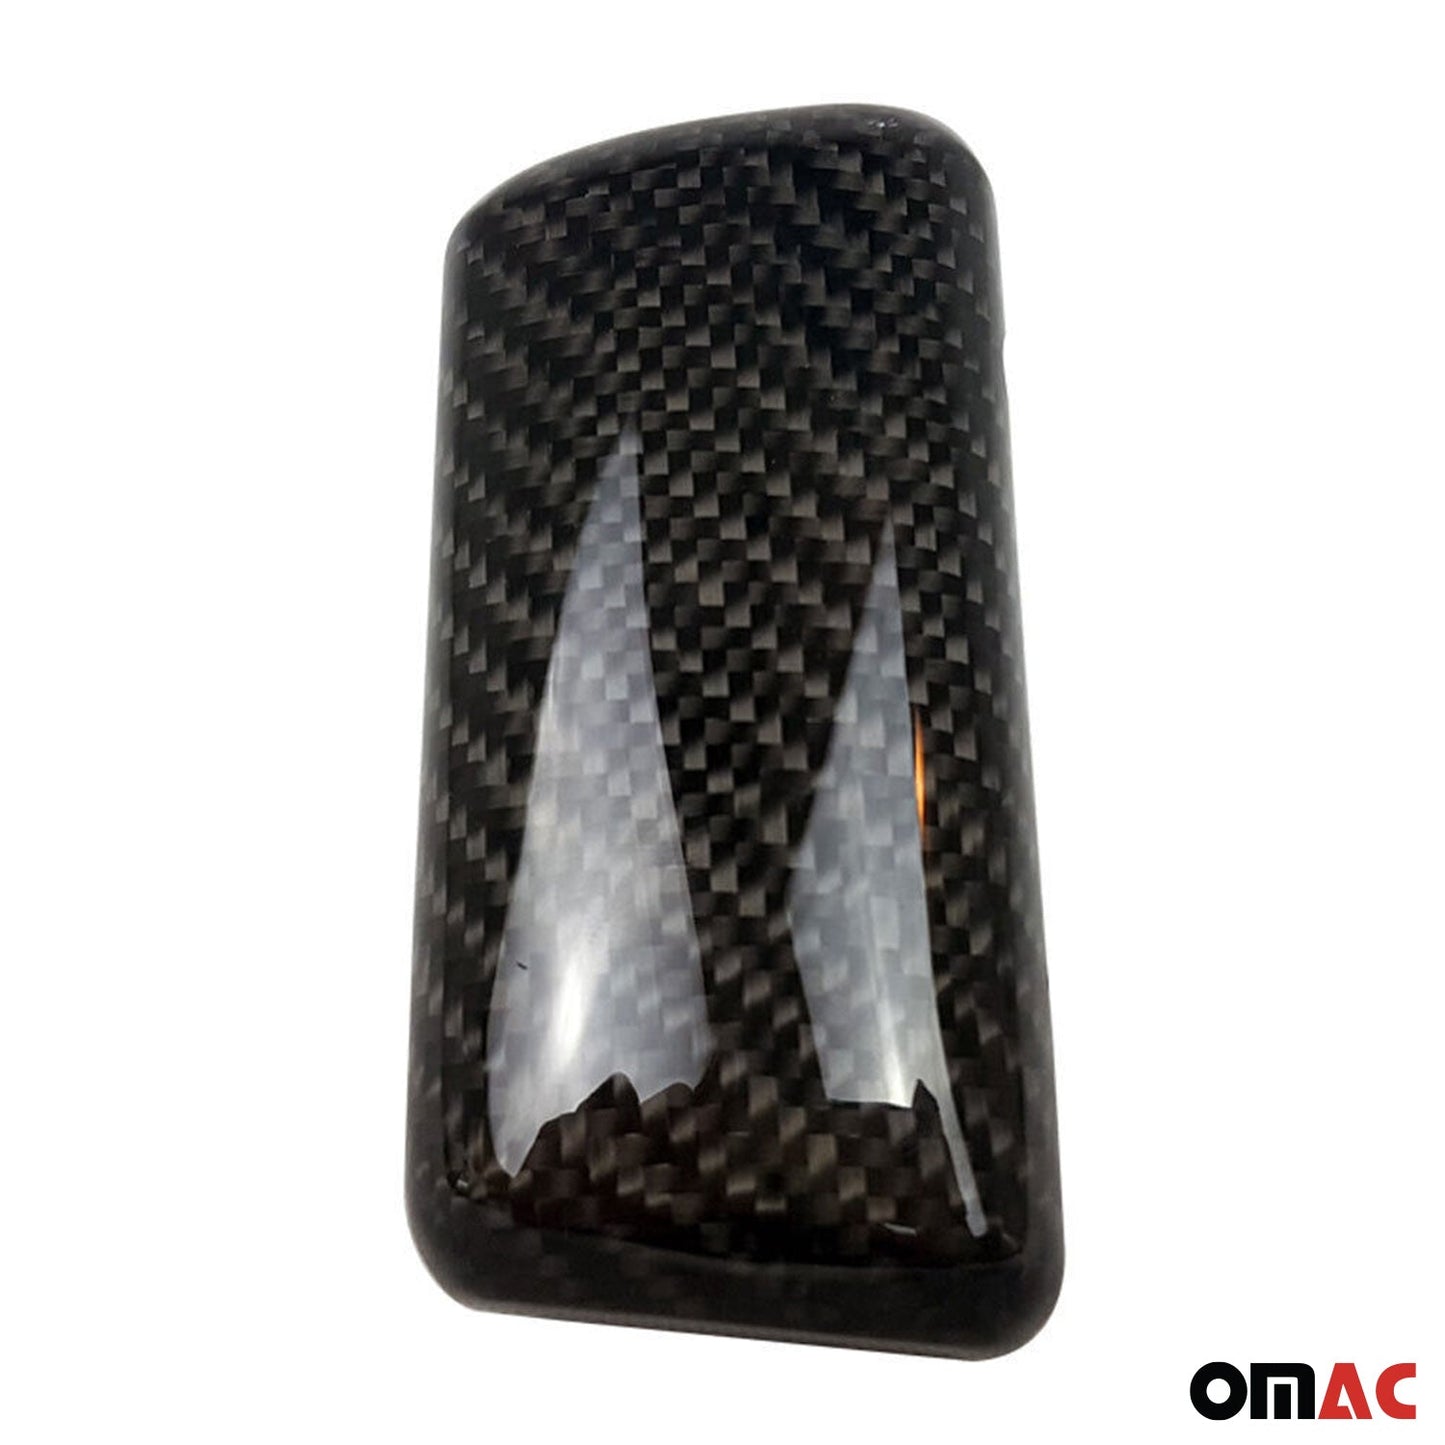 OMAC Gear Shift Knob Shifter for BMW 3 Series E36 1997-2000 Carbon Automatic T-Handle A001769